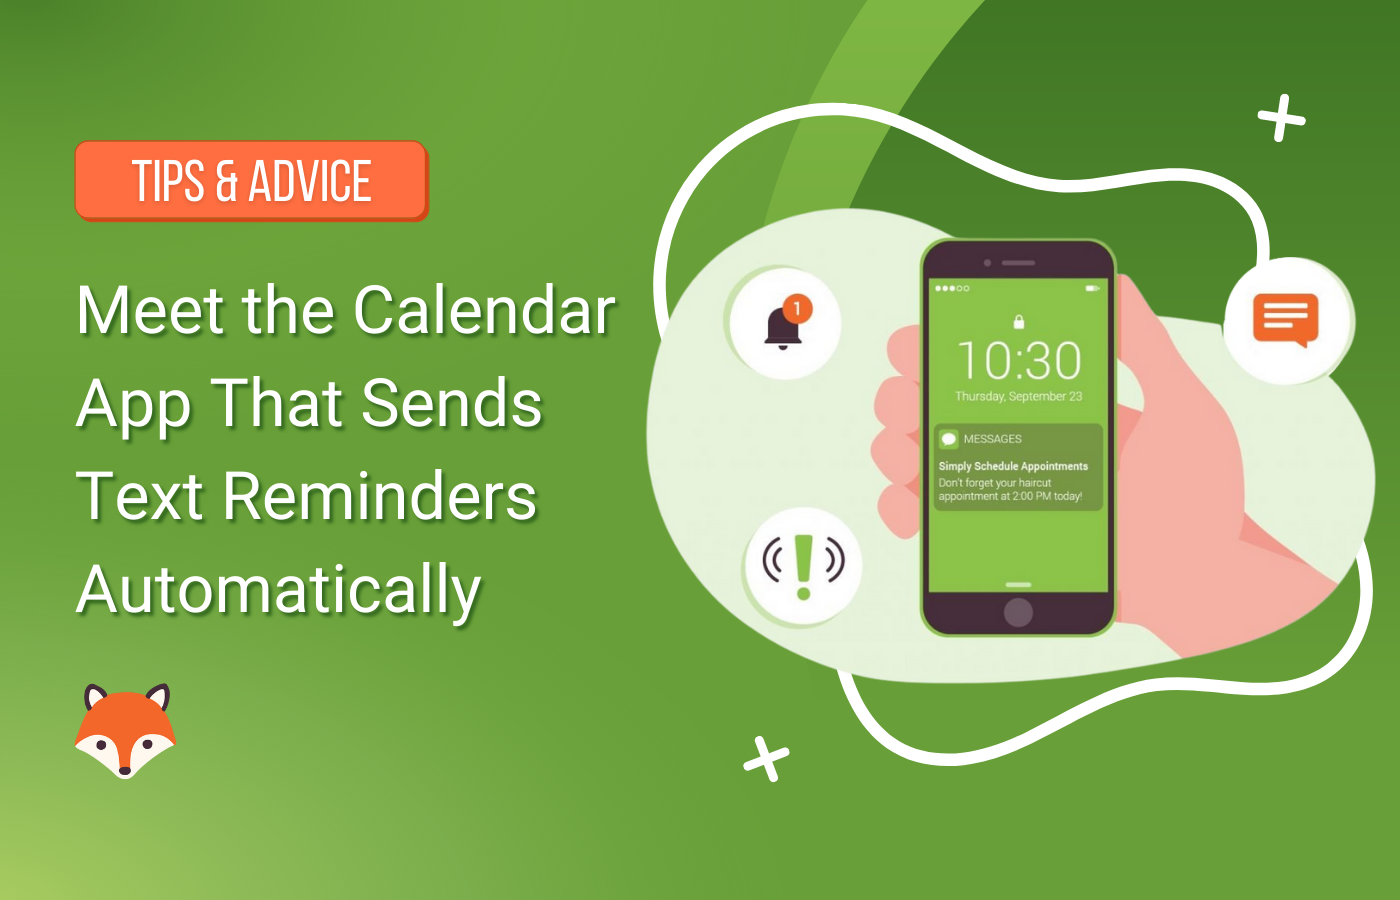 Meet the Calendar App That Sends Text Reminders for Appointments